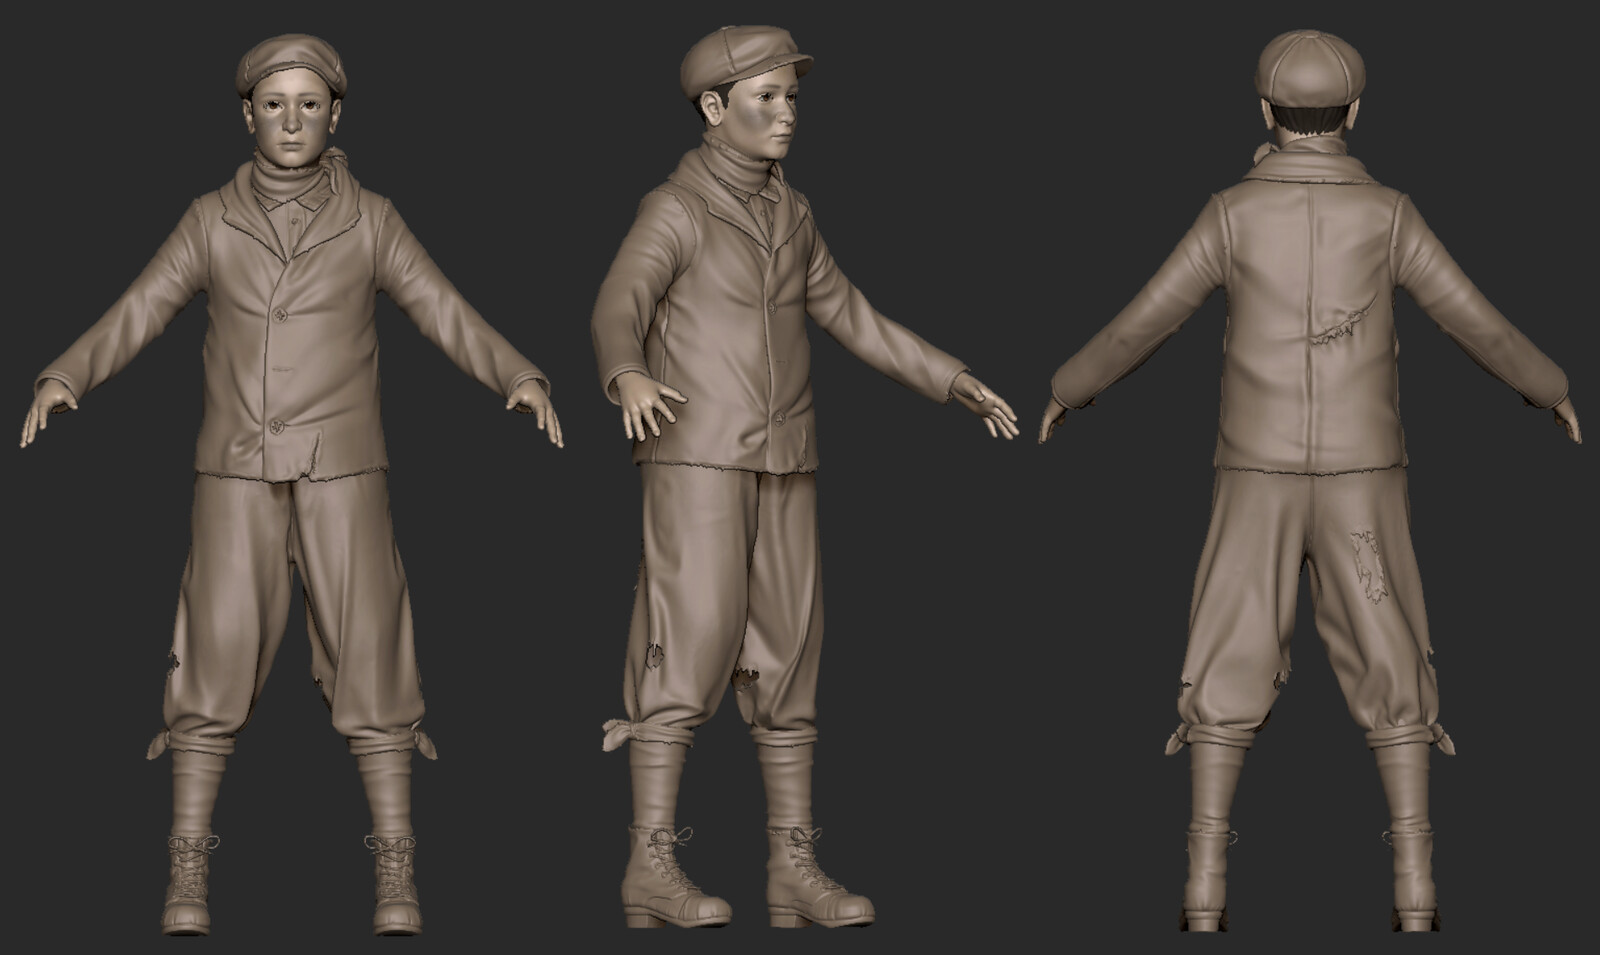 Delve Children Ghosts
Responsible for concepting and hi-poly sculpting. 